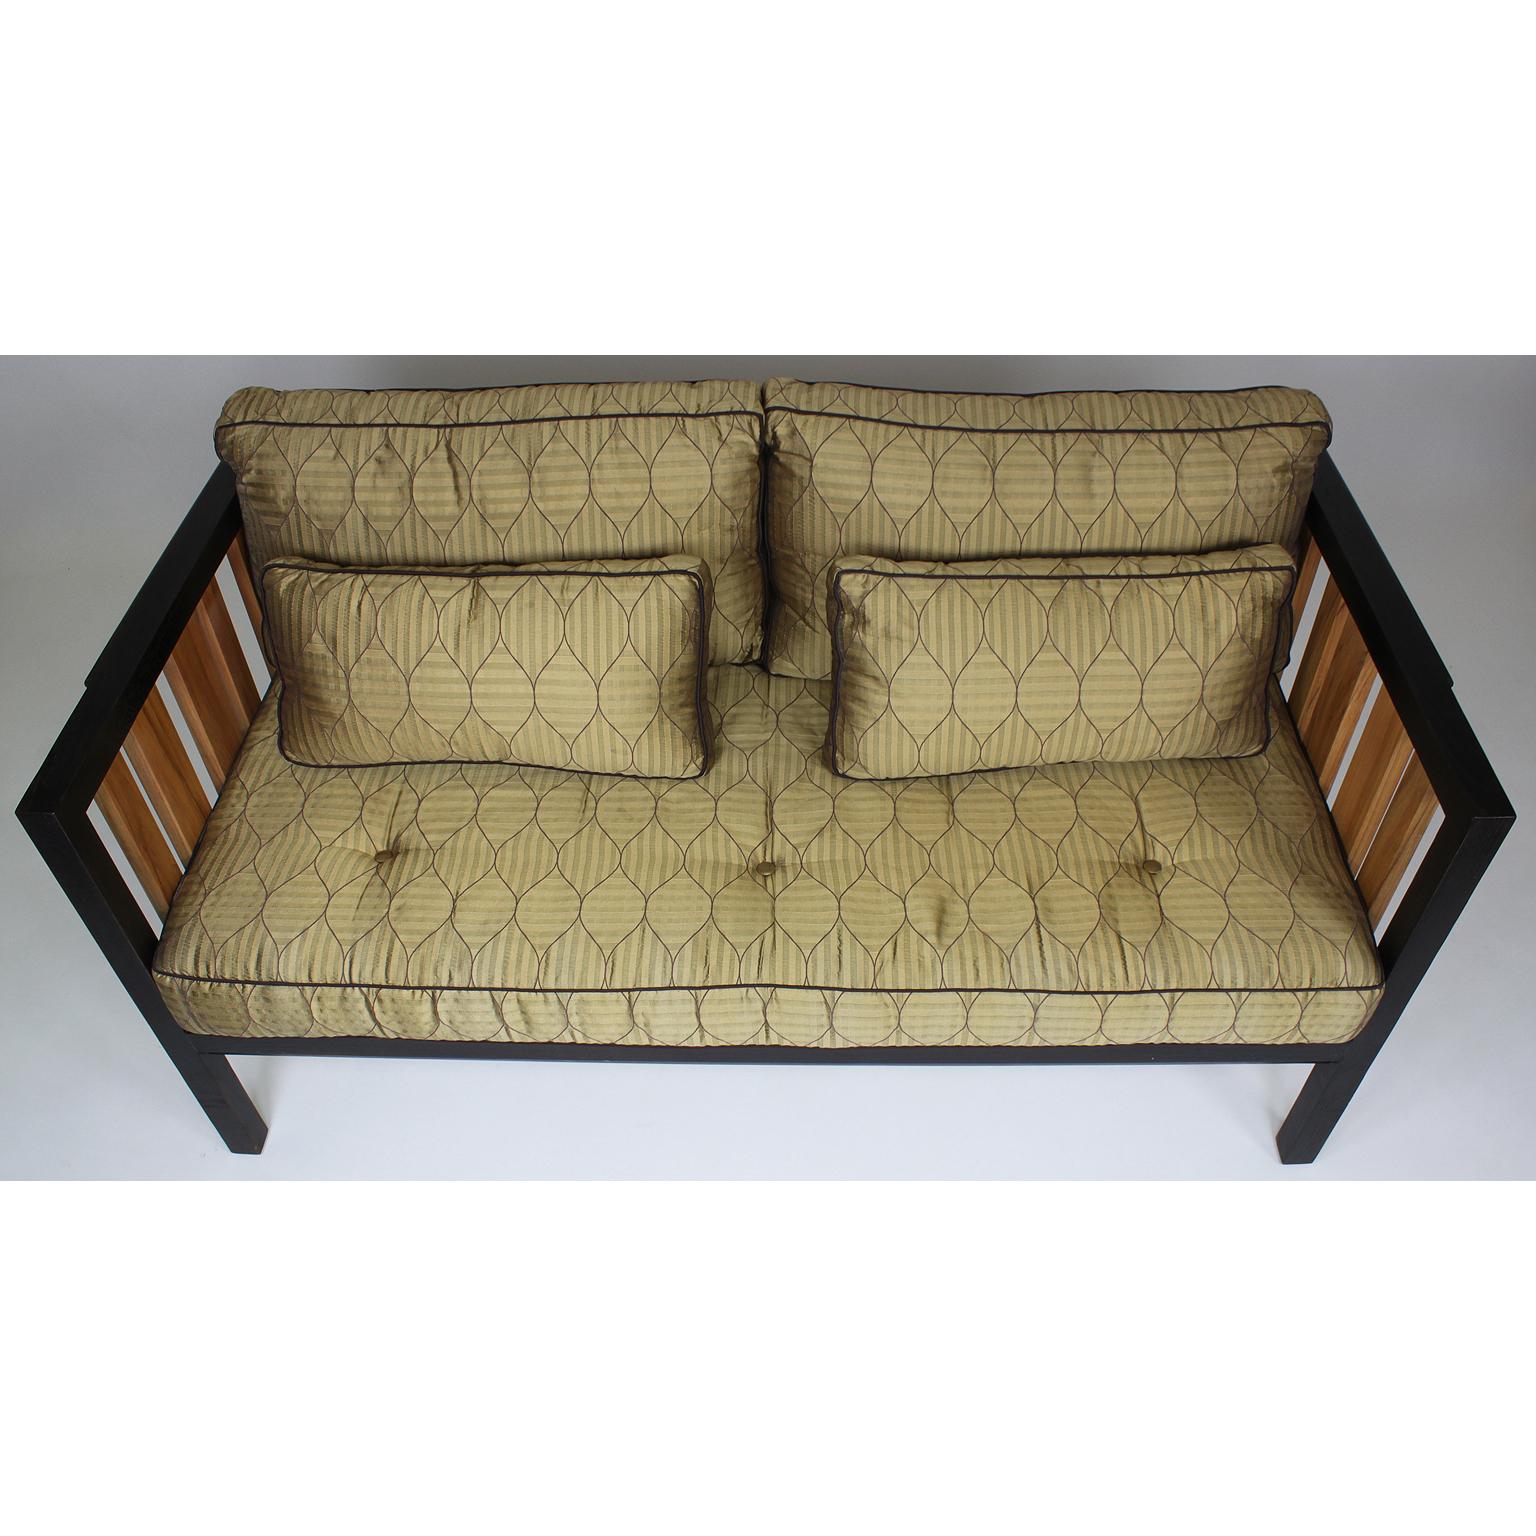 Mid-Century Modern Mahogany and Ash Loveseat, Settee after a Design by Edward Wormley for Dunbar For Sale